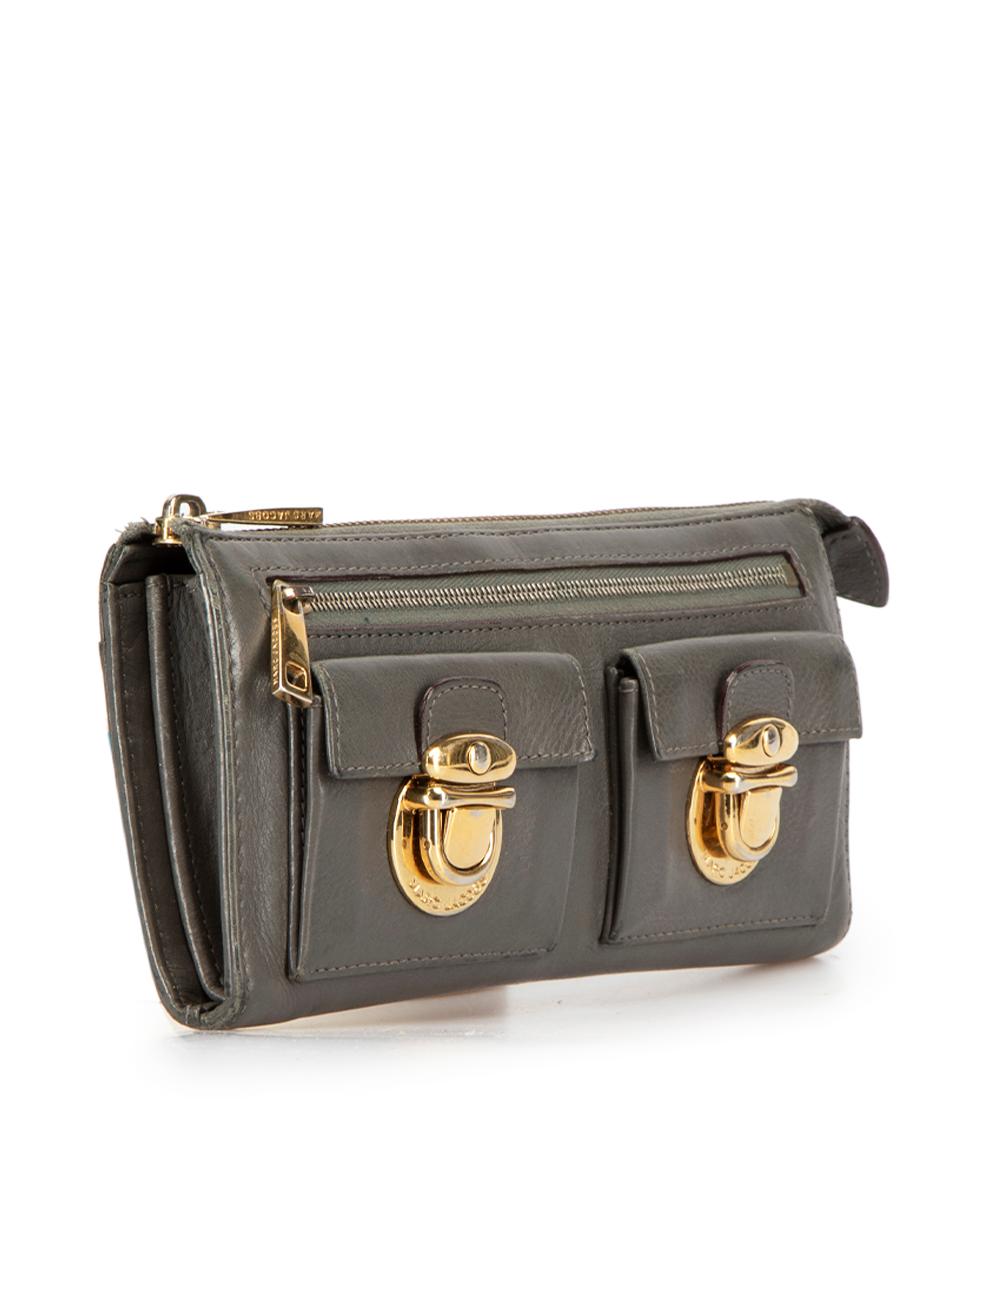 CONDITION is Good. General wear to is evident. Moderate tarnishing to hardware and scuffing to outer corners on this used Marc Jacobs designer resale item.



Details


Vintage

Grey

Leather

Wallet

Gold tone hardware

Zip fastening

4x Main